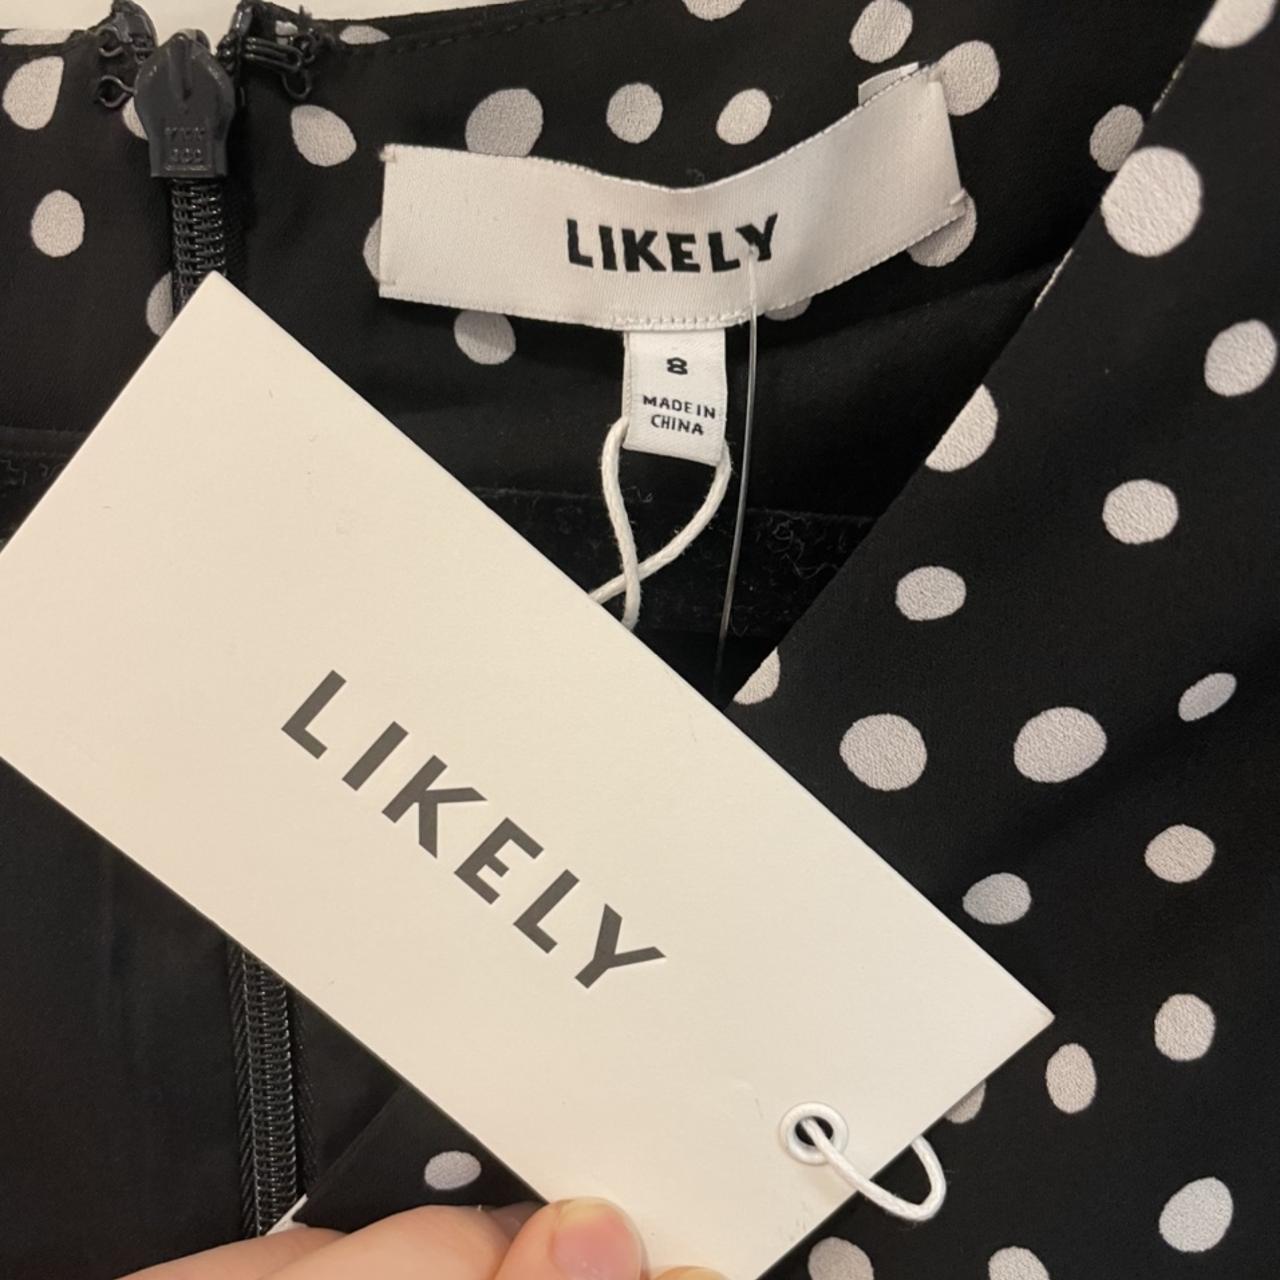 LIKELY Women's Black and White Dress (3)